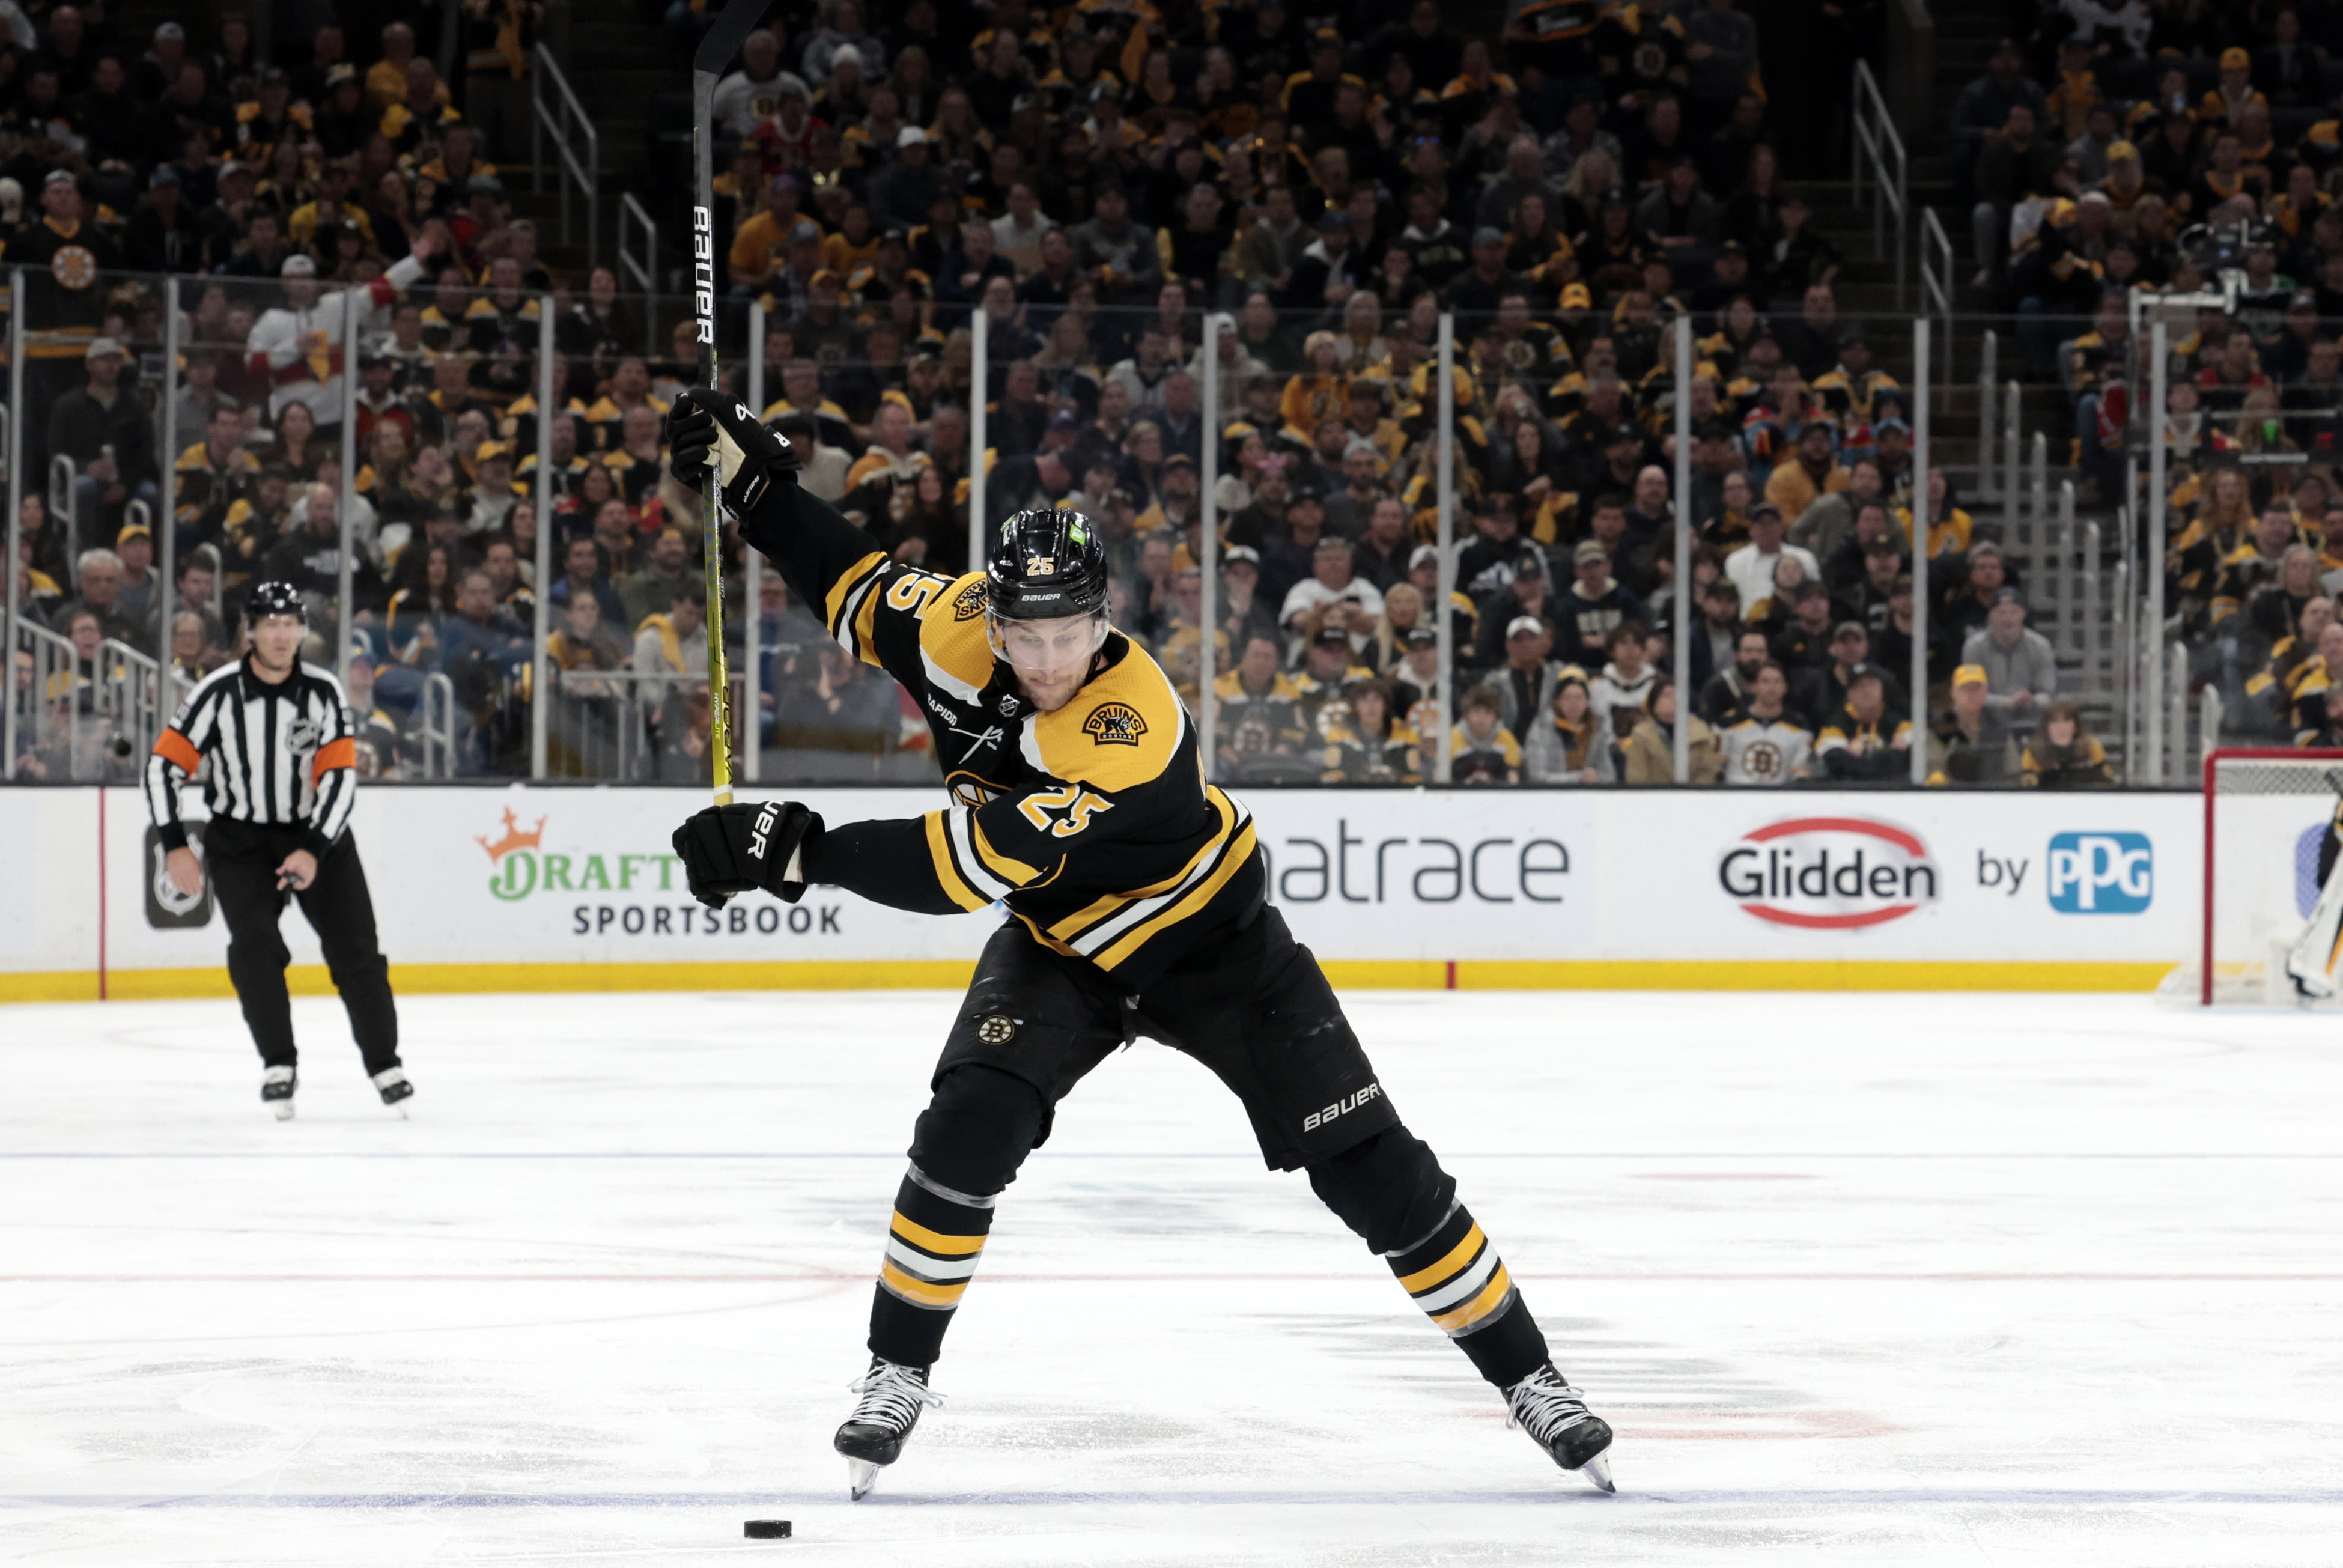 NHL: APR 30 Eastern Conference First Round - Panthers at Bruins